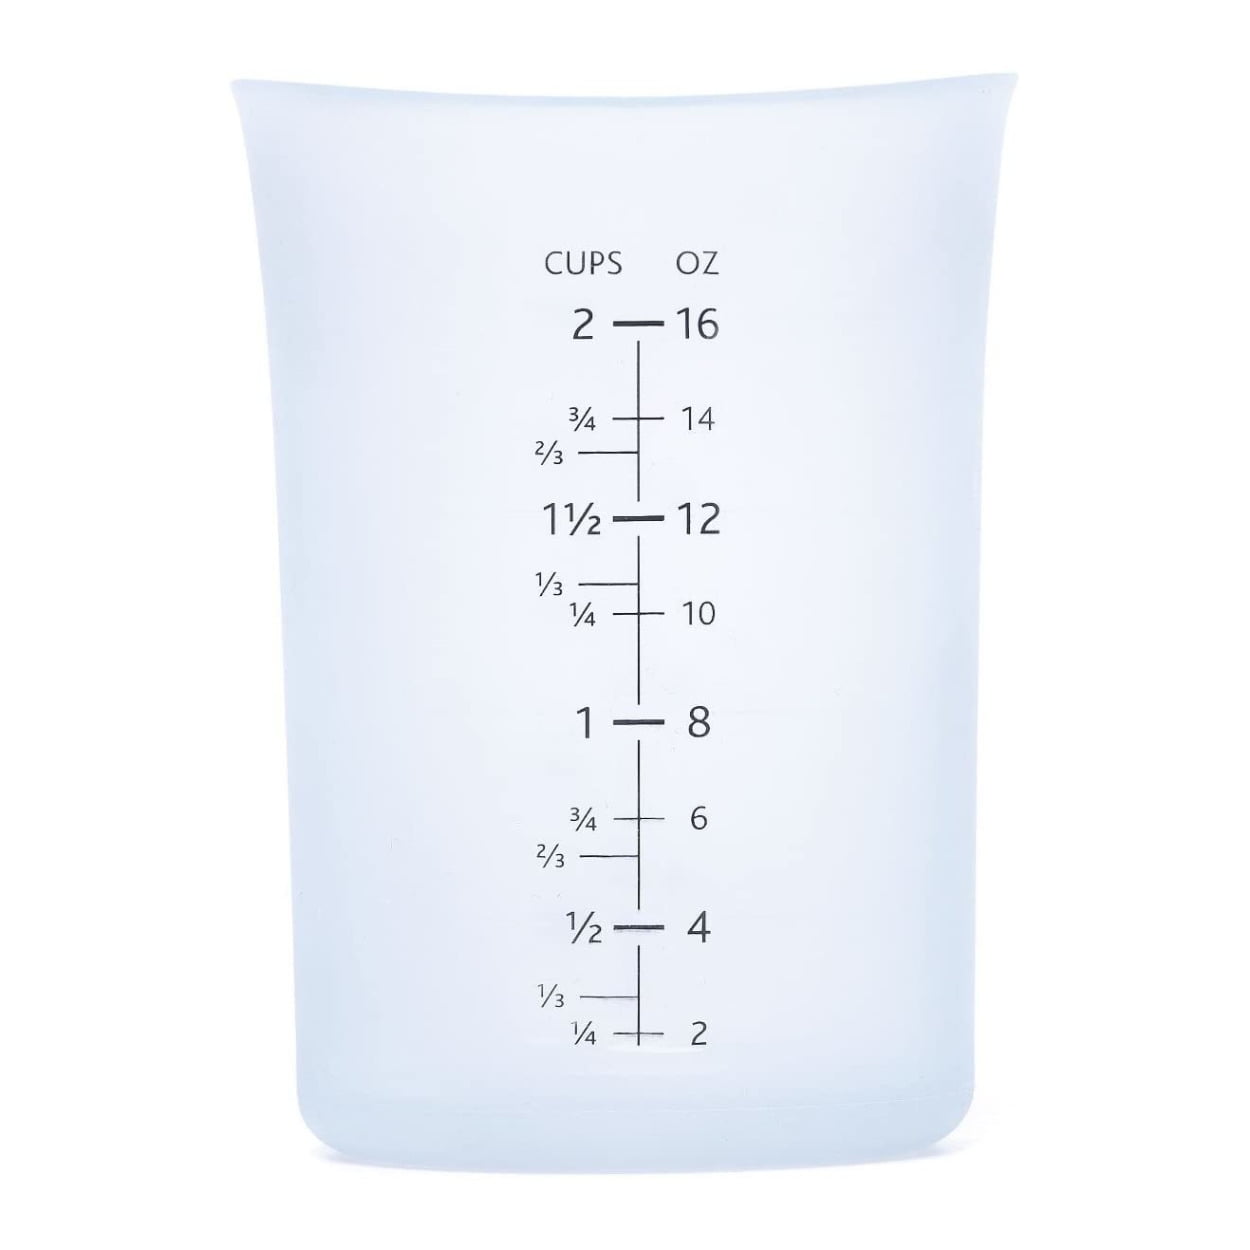 1/4 Cup Measuring CupPerfect for diluting Rennet and Calcium Chloride